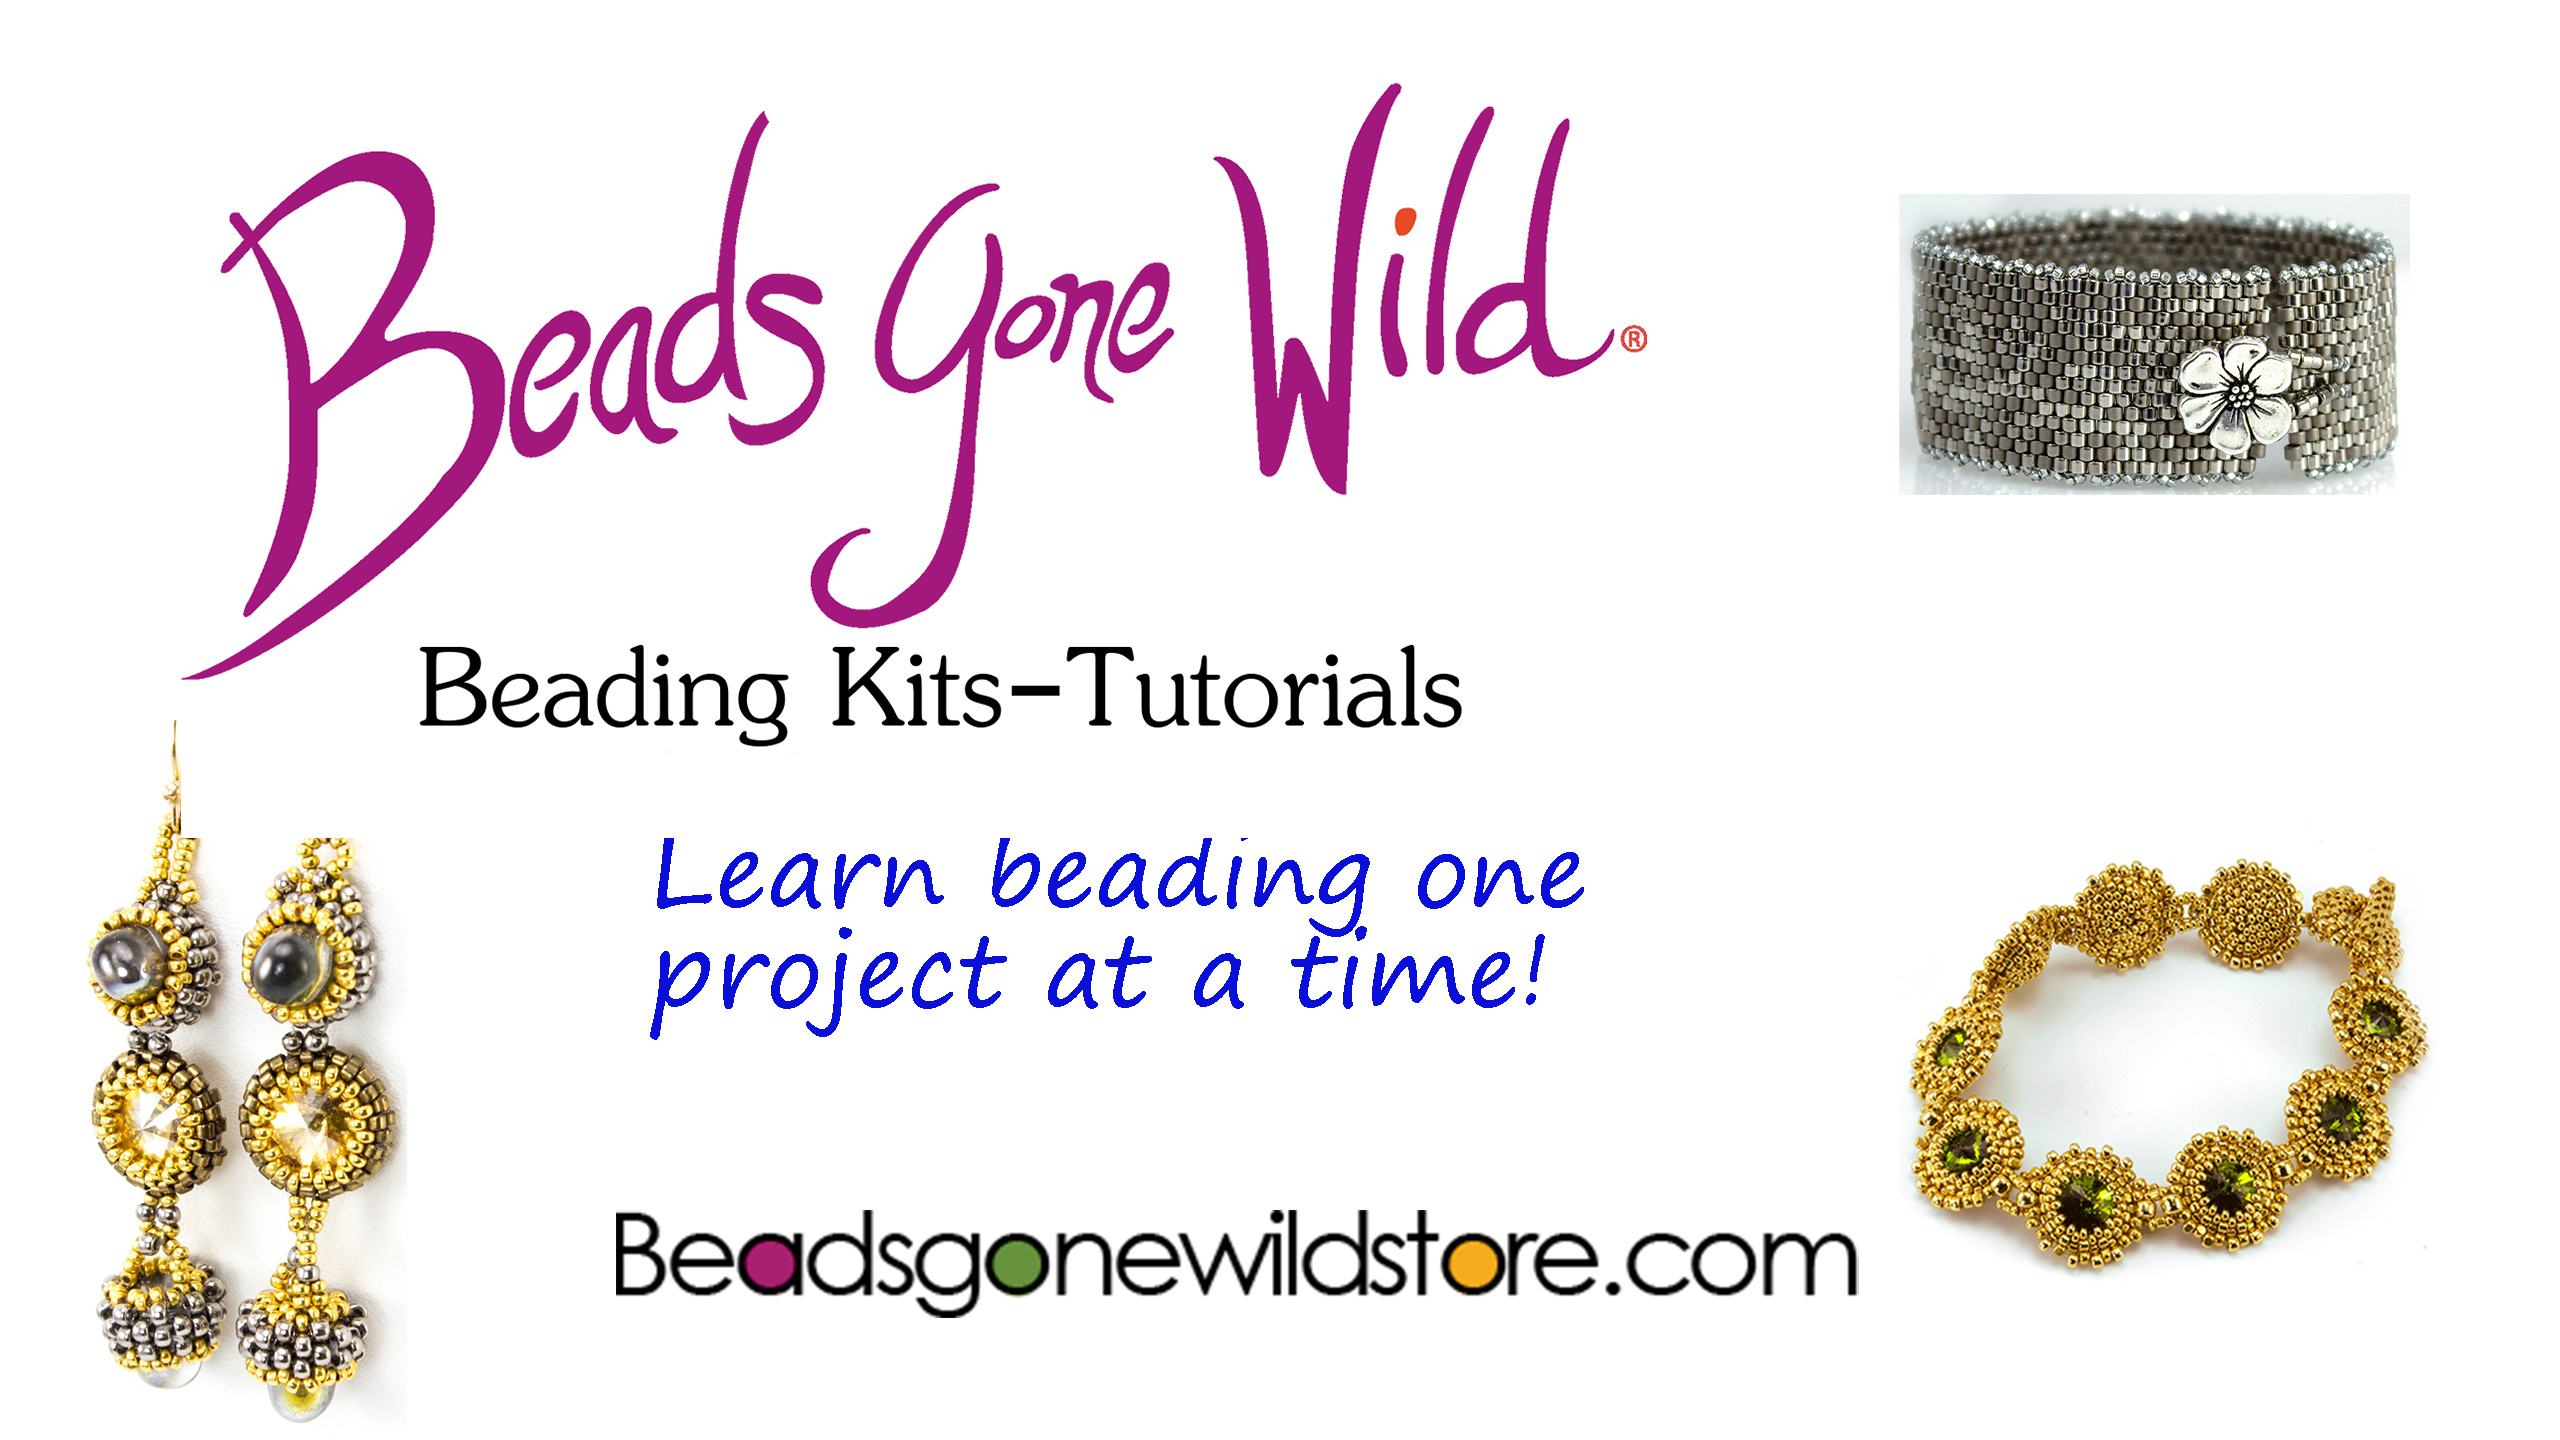 Beads Gone Wild, Beading Kits, Tutorials. Learn Beading one project at a time.